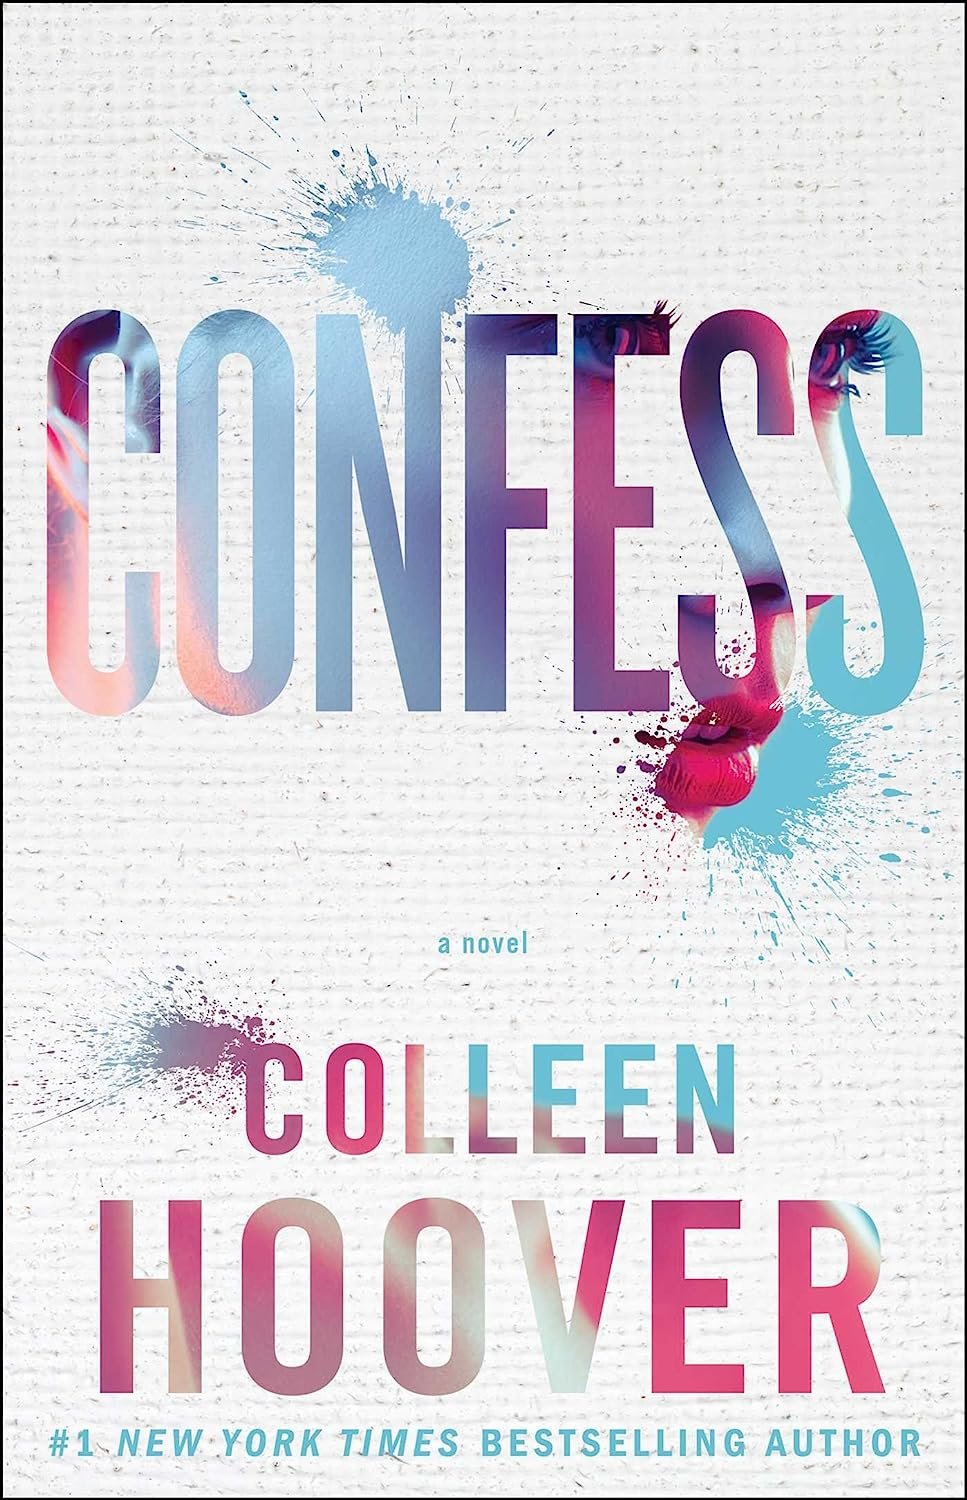 confess by colleen hoover.jpg